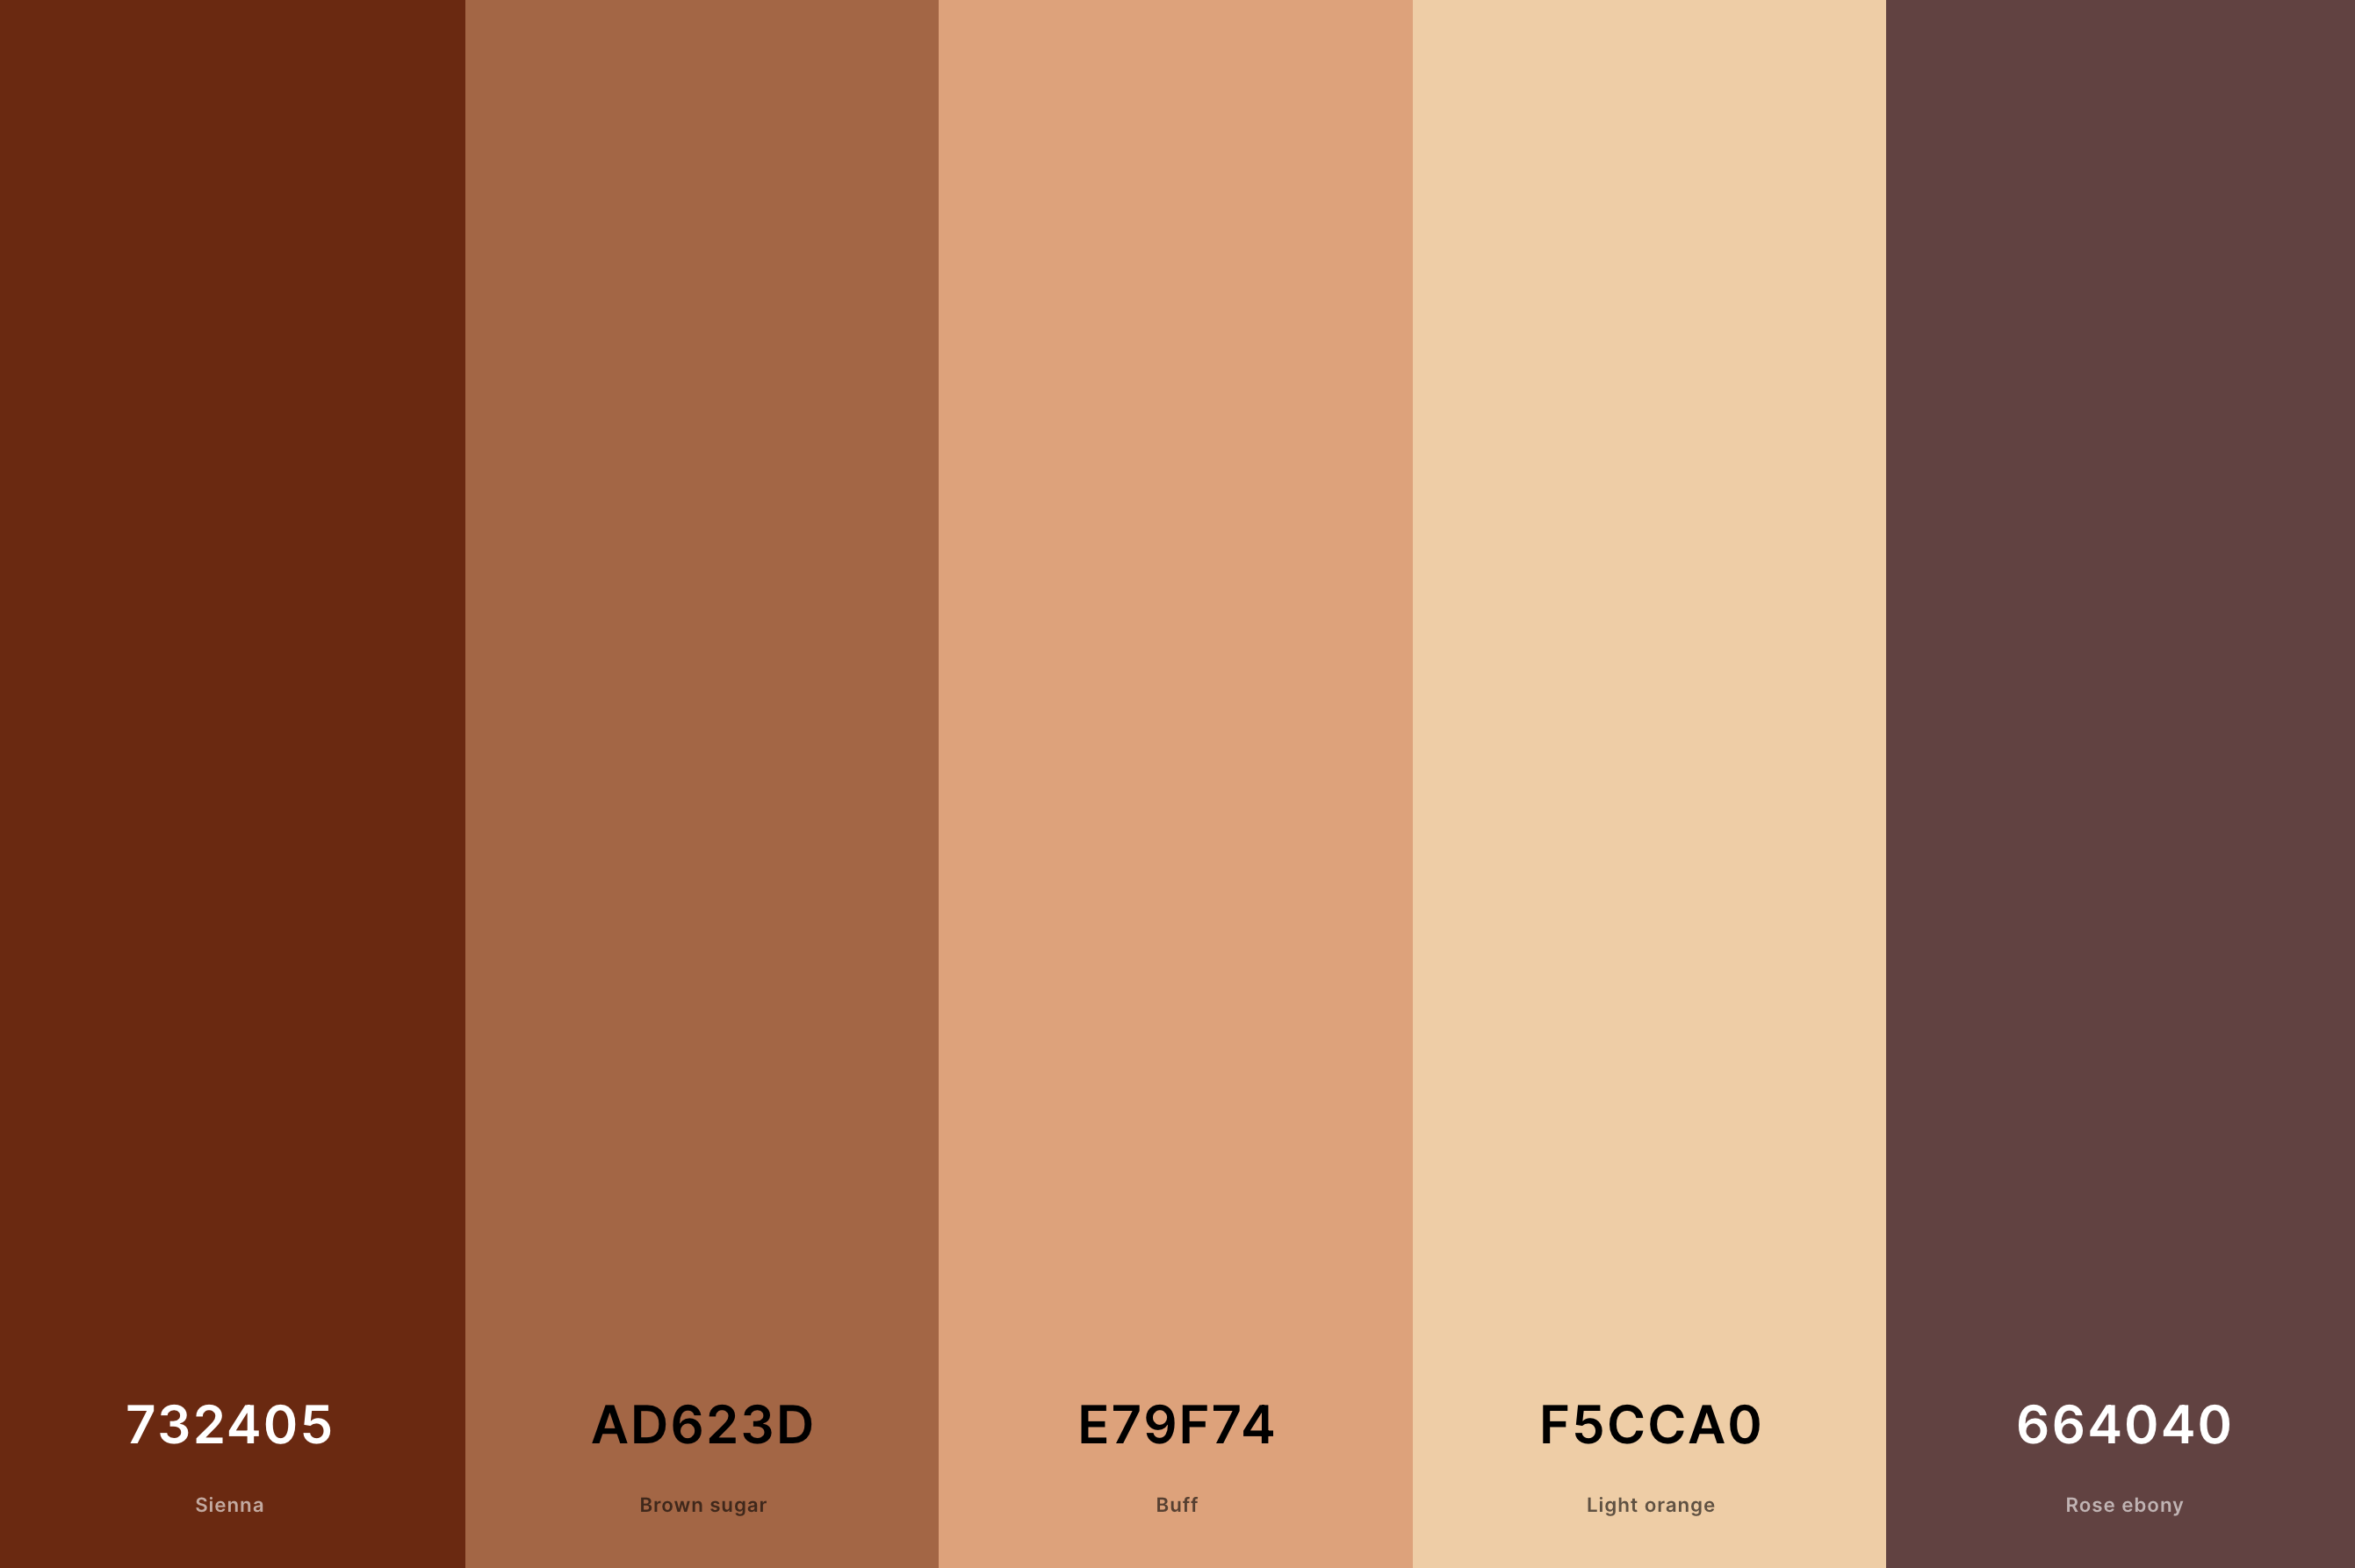 3. Warm Terracotta Color Palette Color Palette with Sienna (Hex #732405) + Brown Sugar (Hex #AD623D) + Buff (Hex #E79F74) + Light Orange (Hex #F5CCA0) + Rose Ebony (Hex #664040) Color Palette with Hex Codes